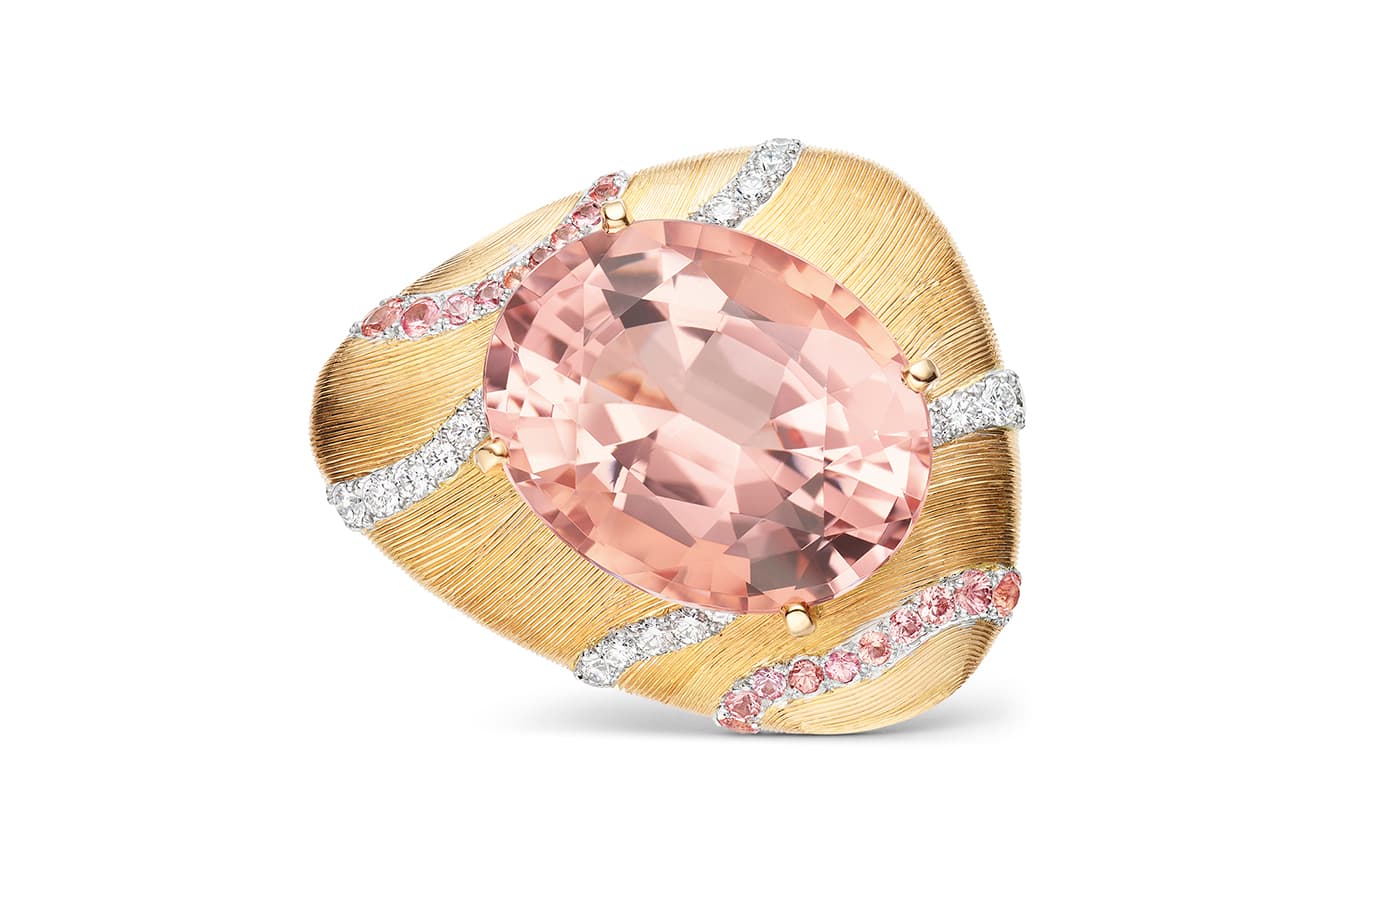 Chaumet Golden Pebbles ring in yellow gold, morganite and diamond from the Ondes et Merveilles High Jewellery collection